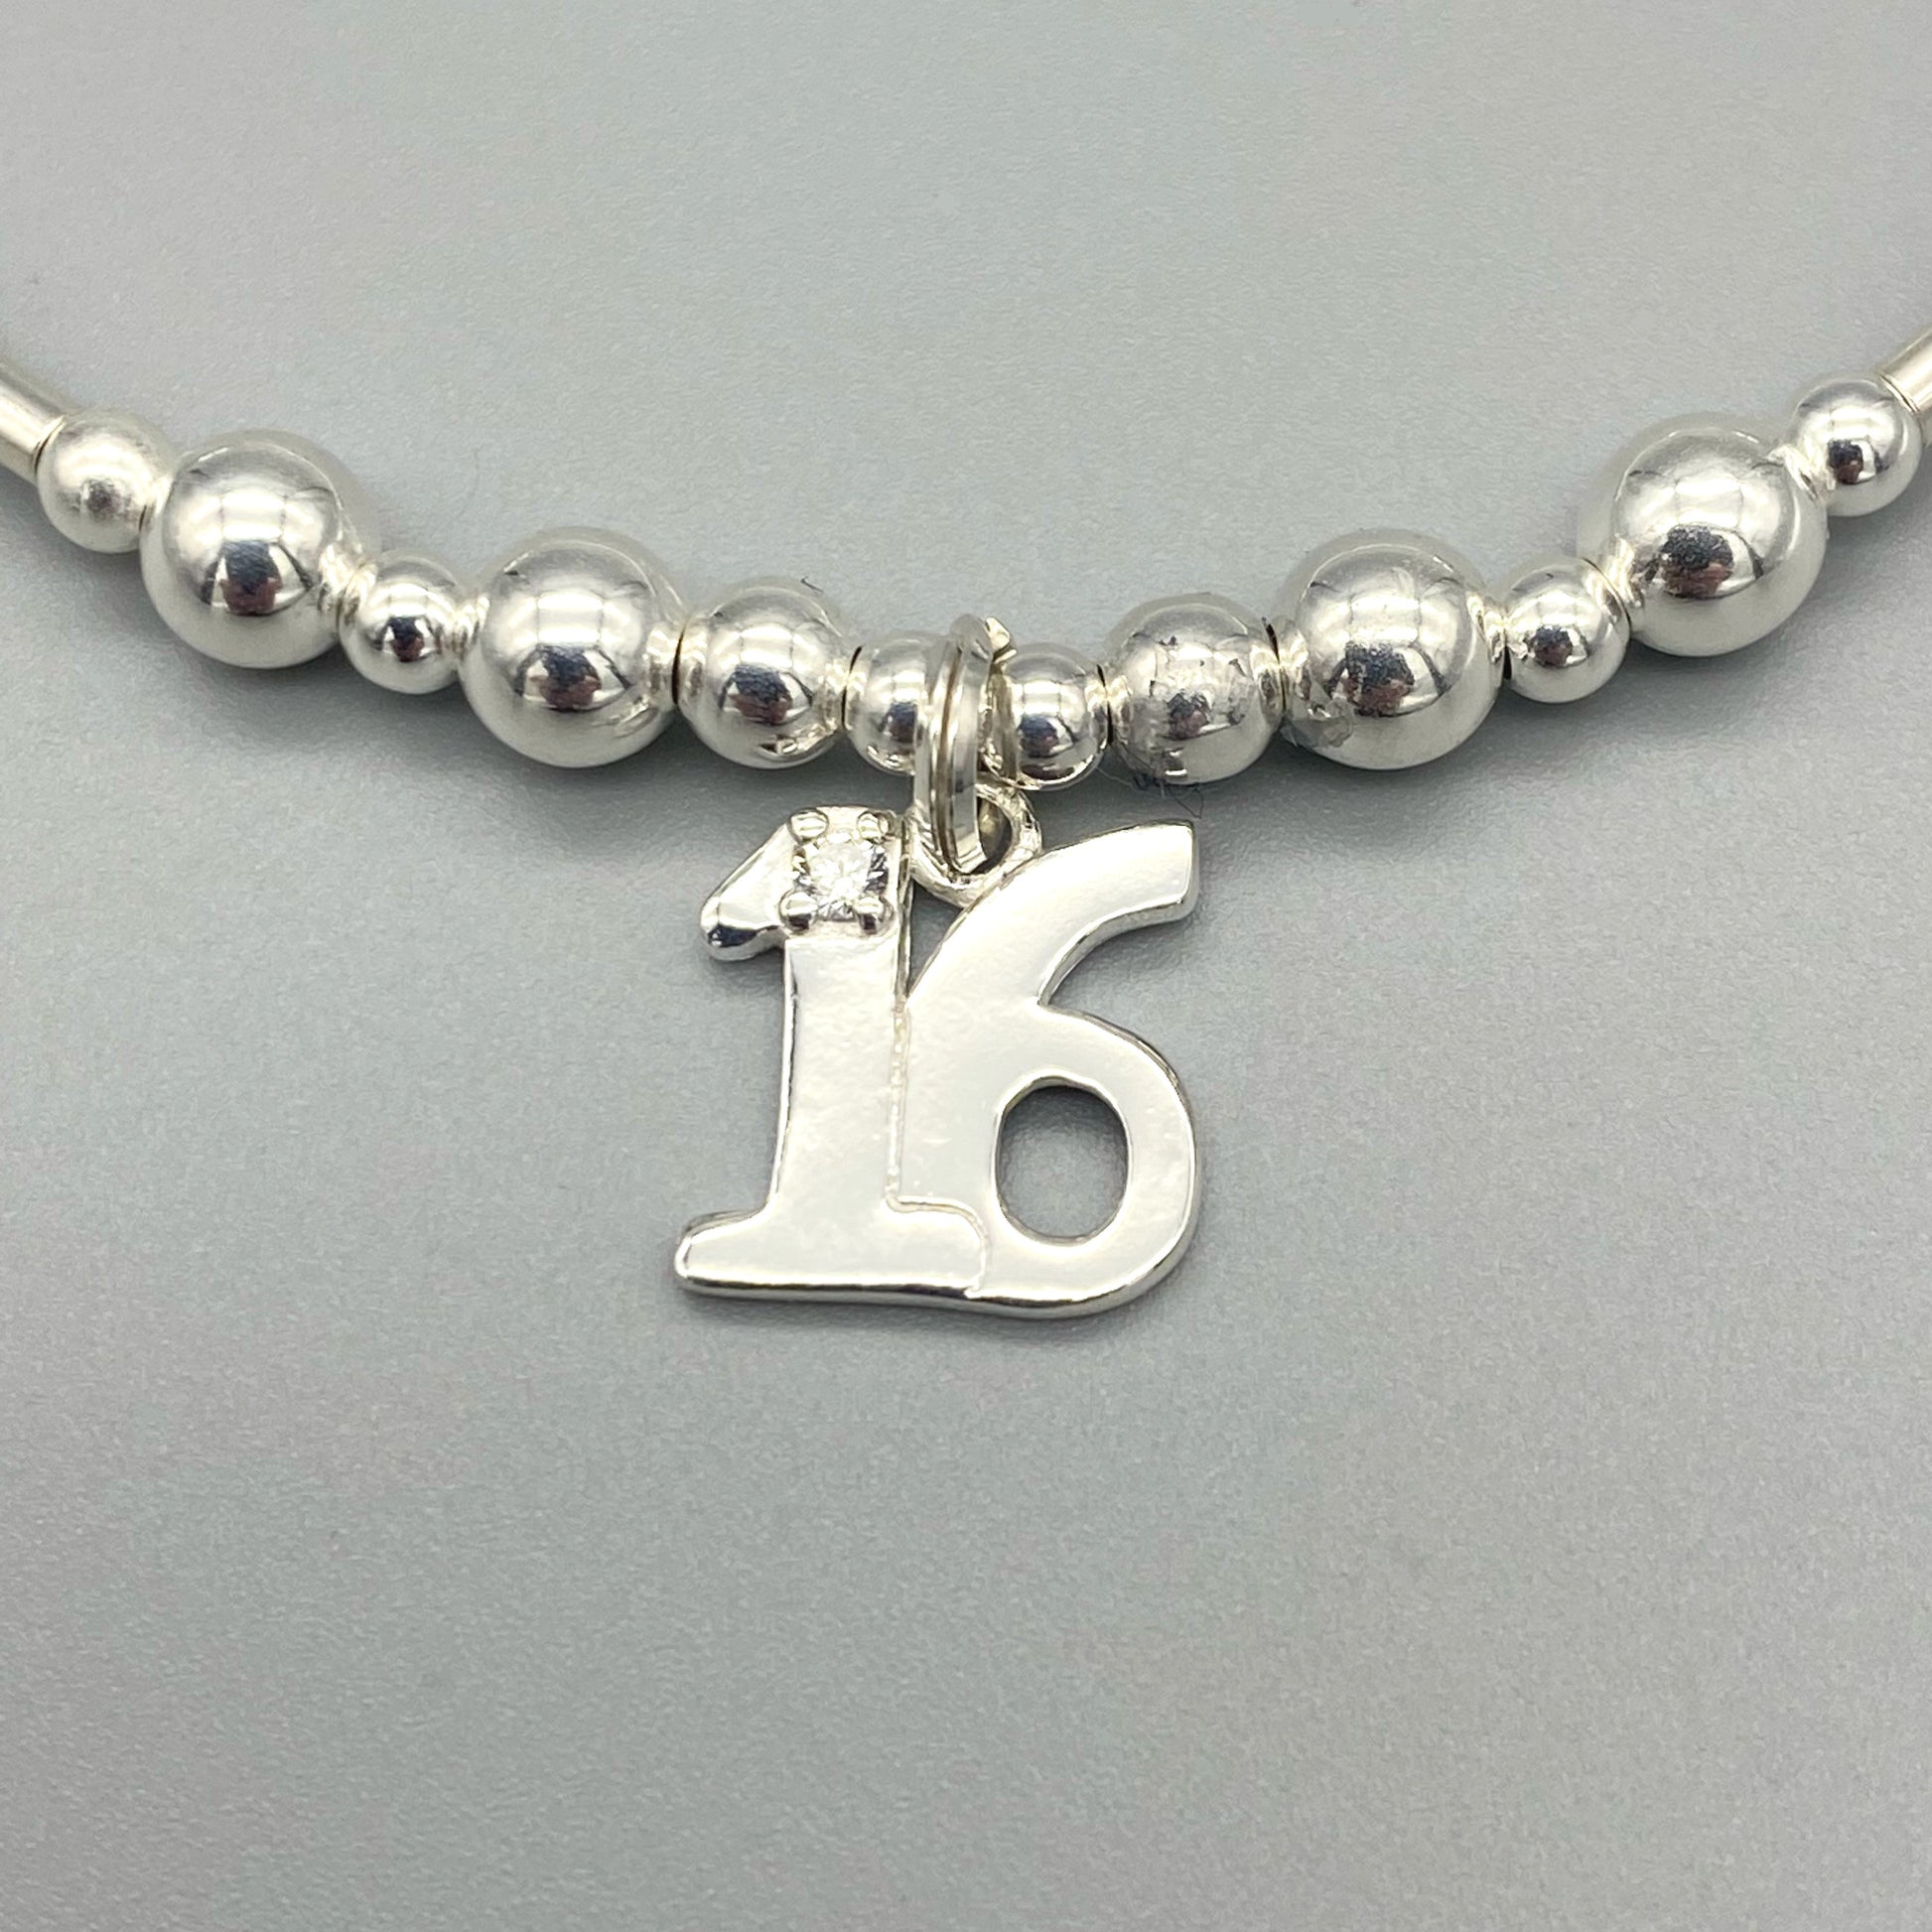 Closeup of 16th birthday charm sterling silver girl's stacking bracelet by My Silver Wish